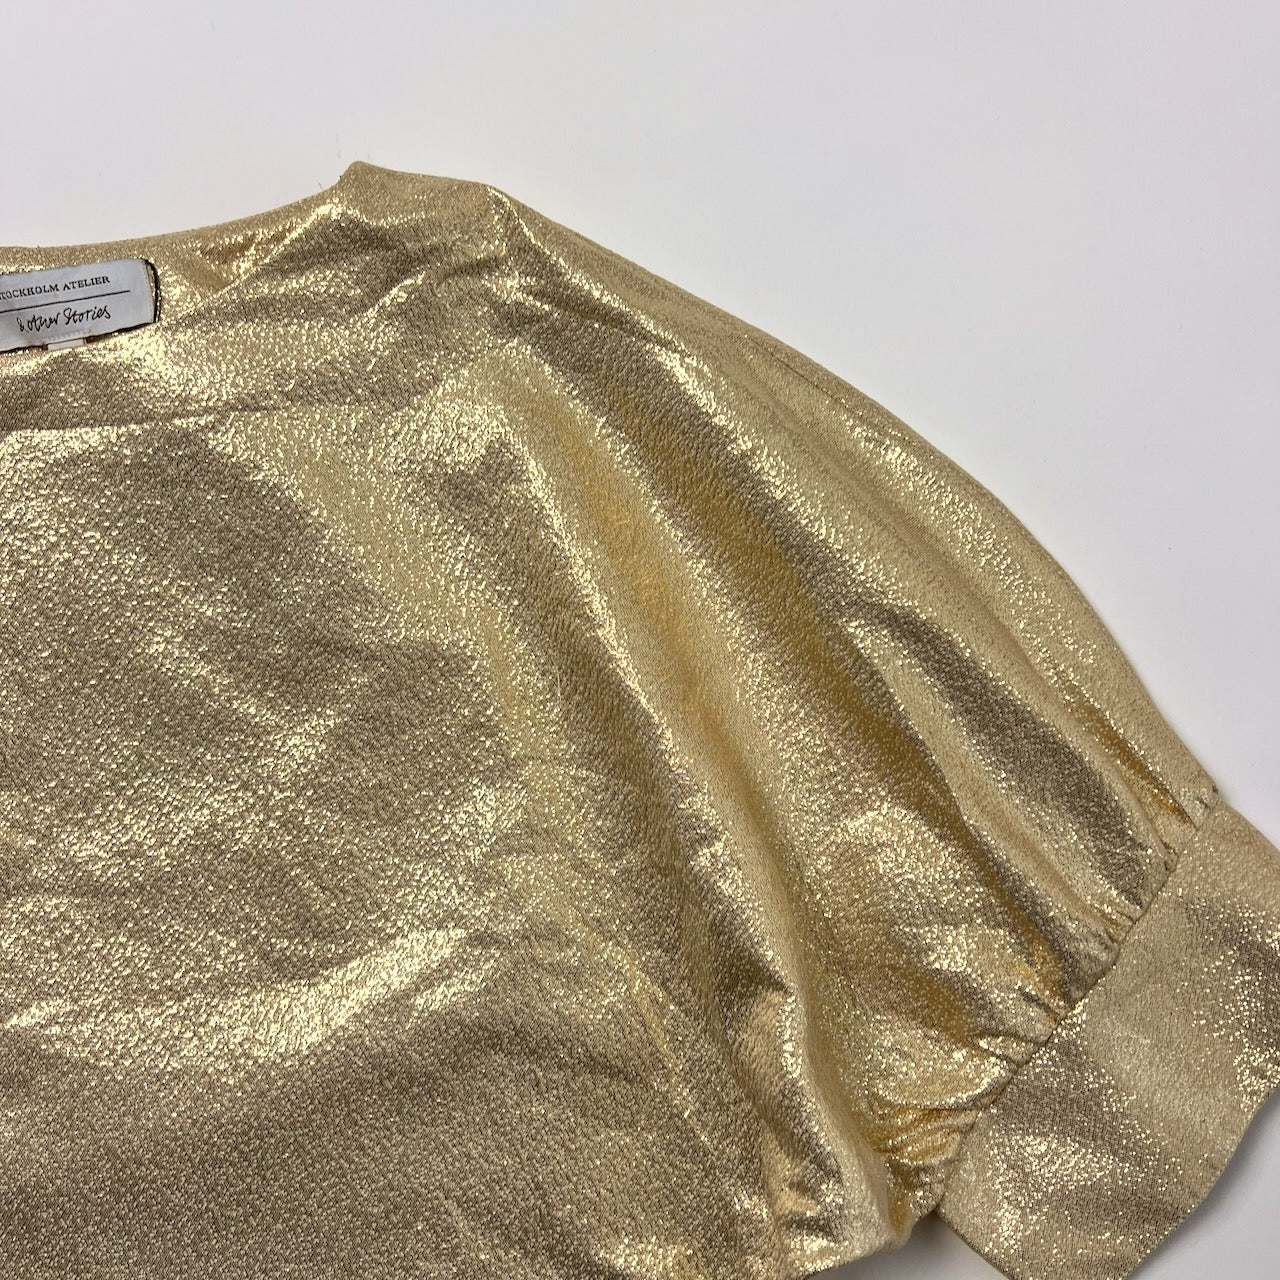 & Other Stories hammered gold blouse 